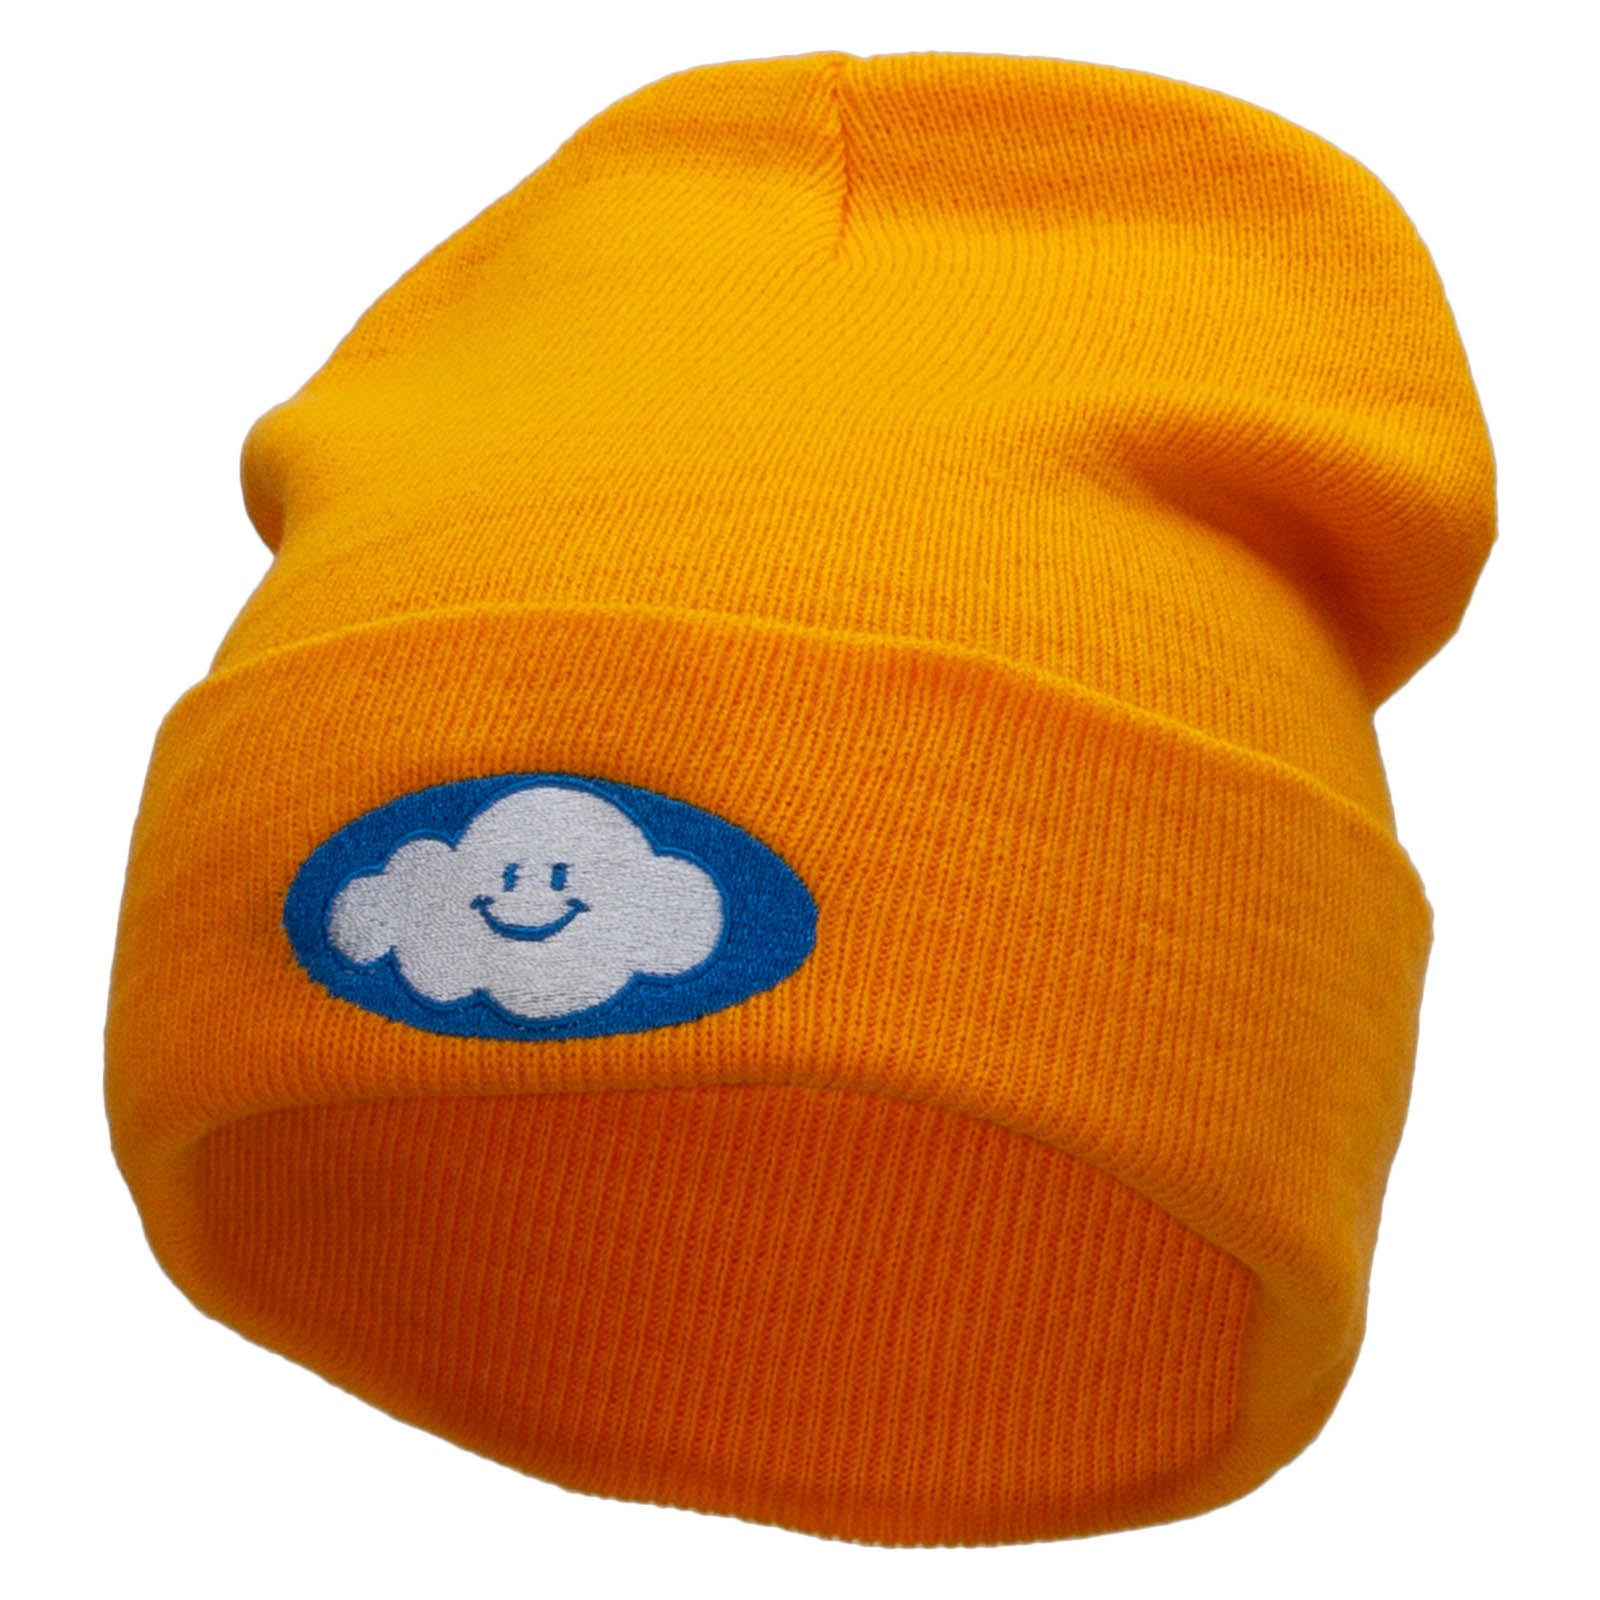 Smile Cloud Embroidered 12 Inch Long Knitted Beanie - Yellow OSFM